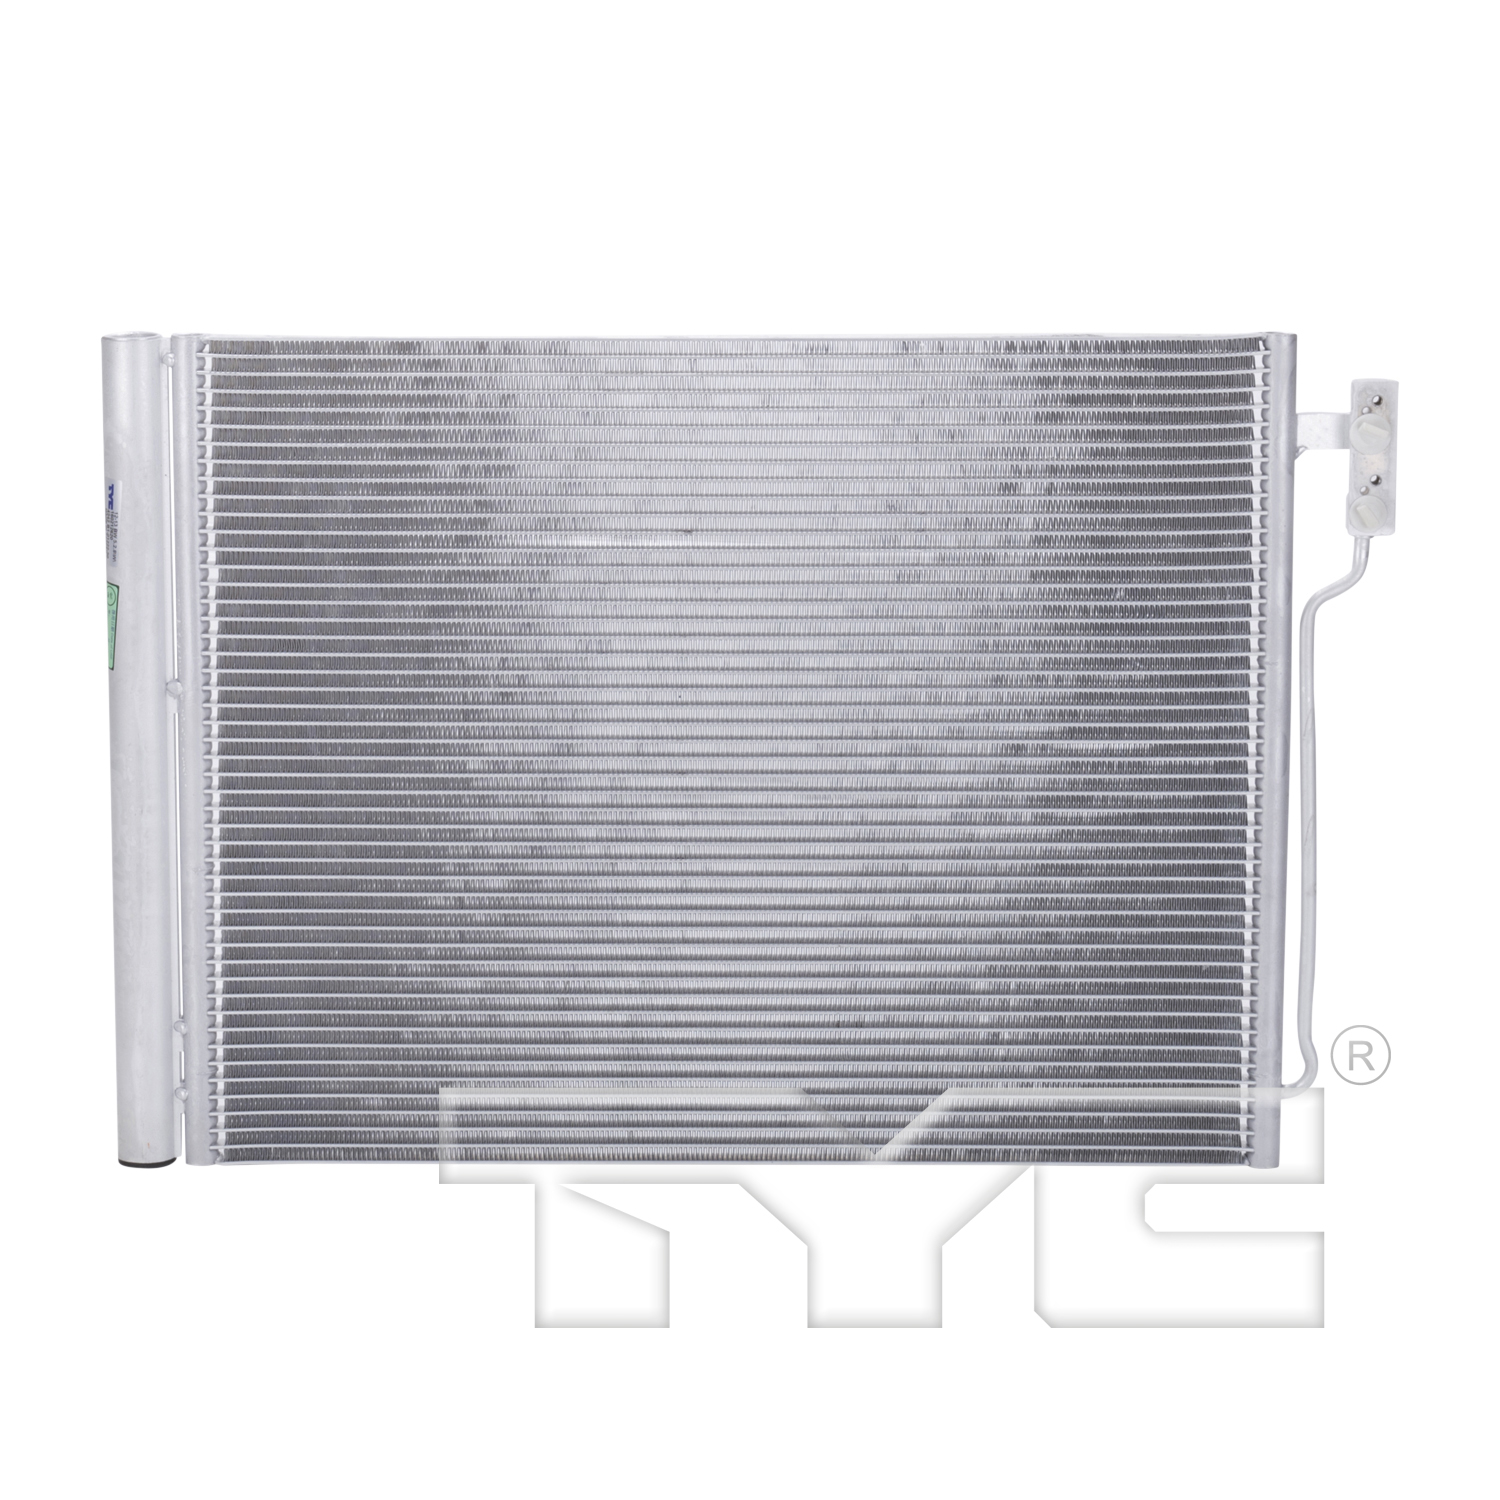 Aftermarket AC CONDENSERS for BMW - 528I, 528i,12-16,Air conditioning condenser